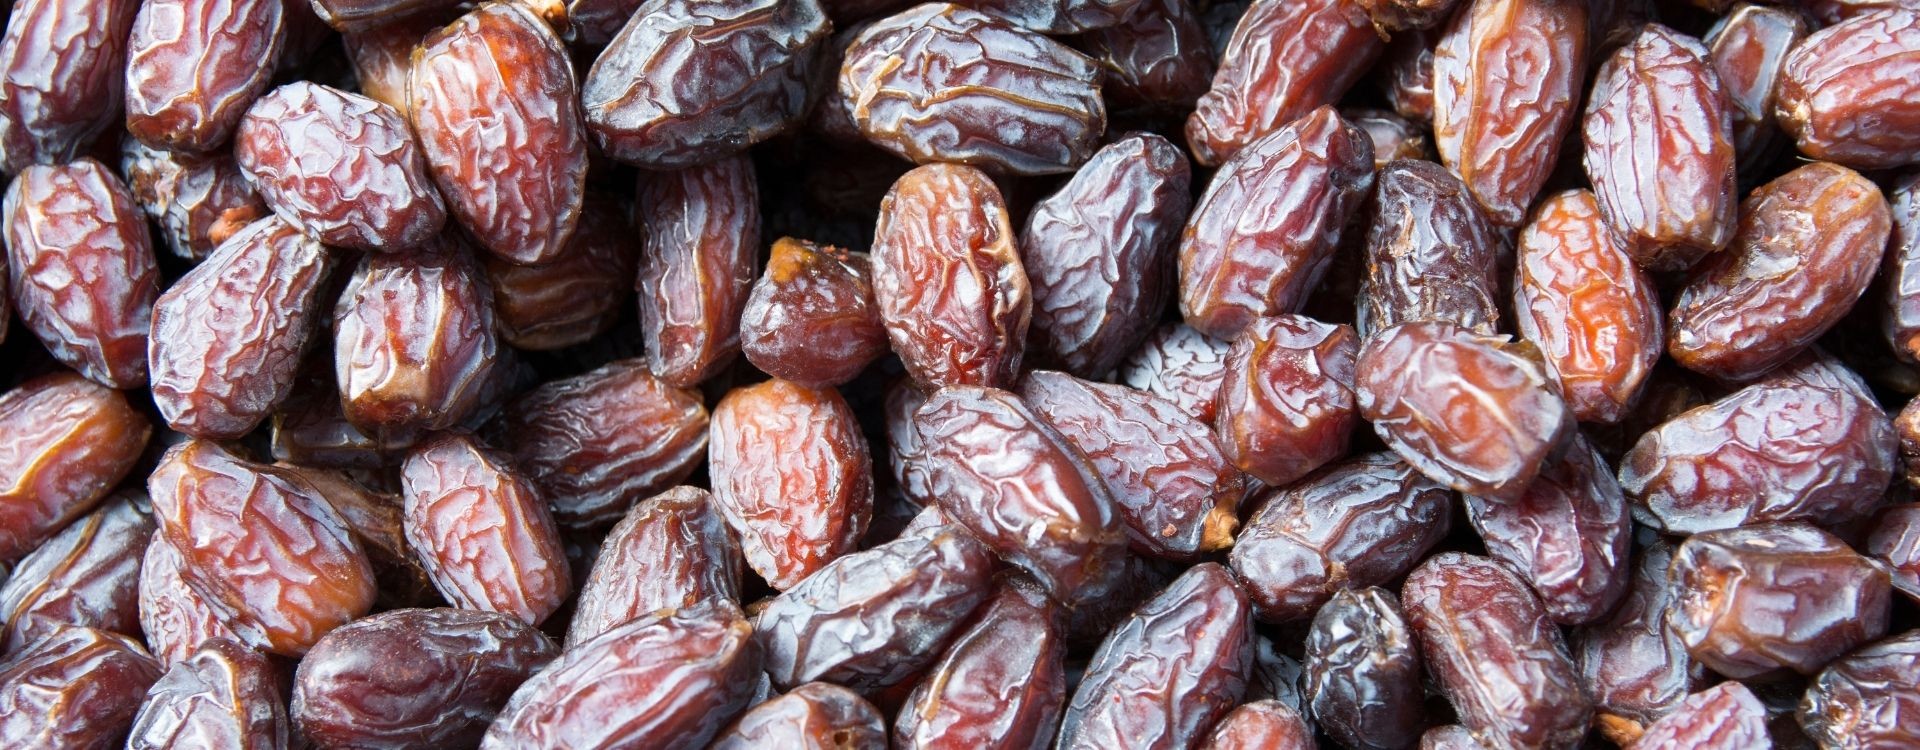 Health Benefits of Dried Dates - Are They Good for You?